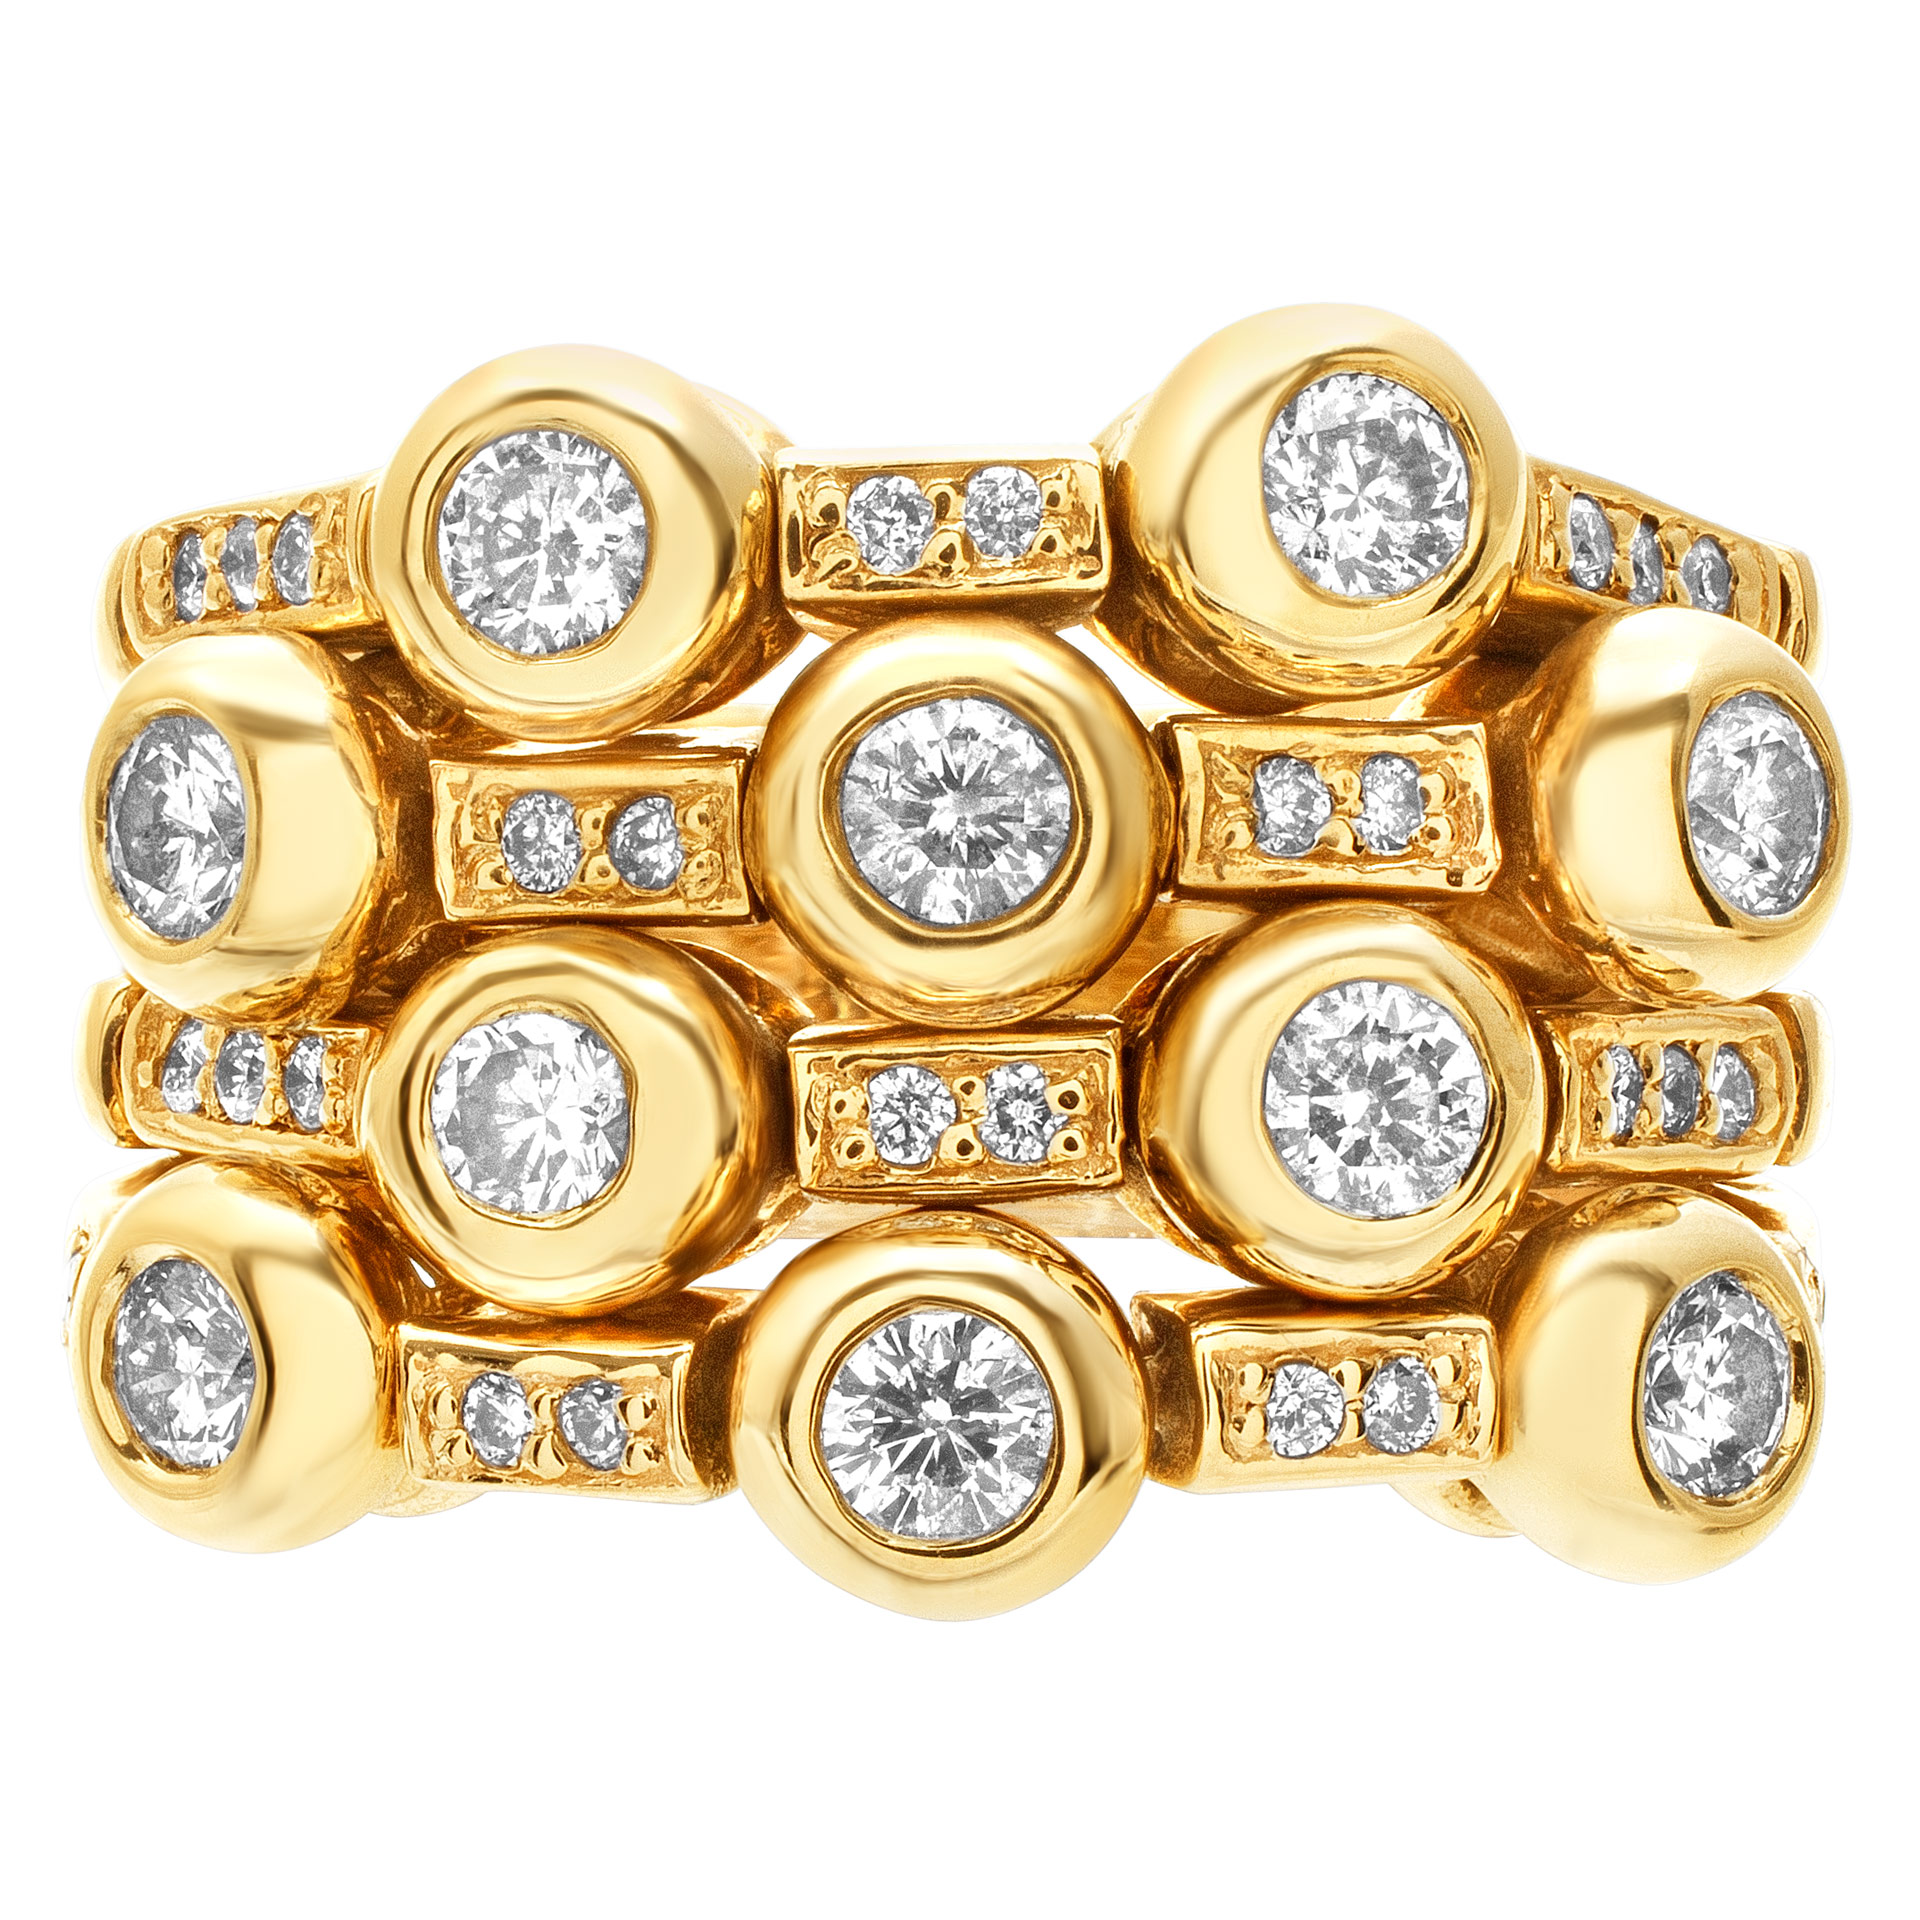 Flexible diamond ring with over 1.0 ct in diamonds set in 14k gold